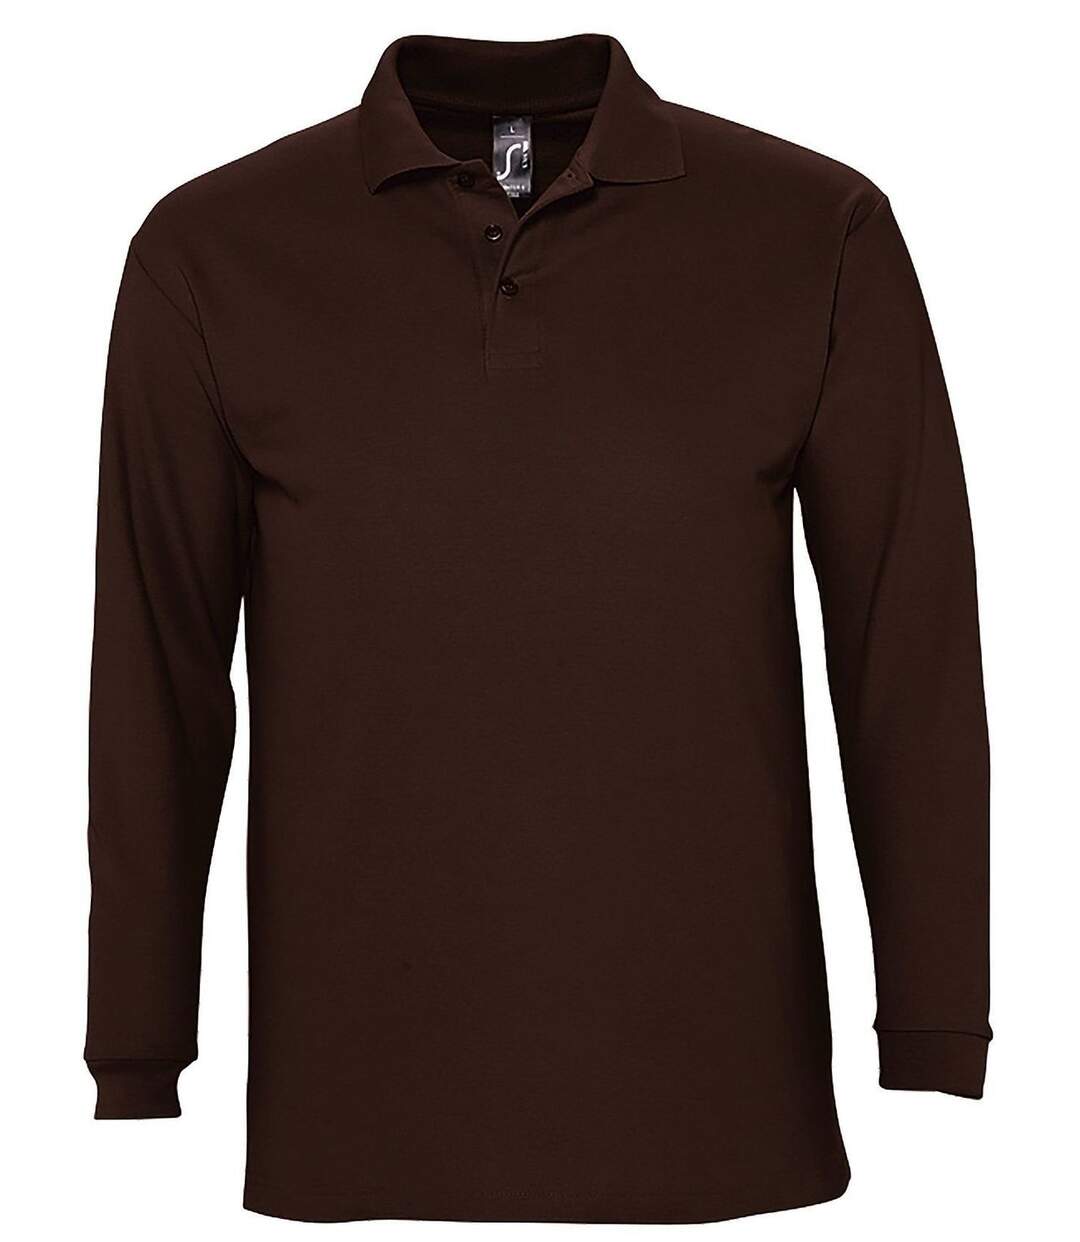 Polo manches longues - Homme - 11353 - marron chocolat